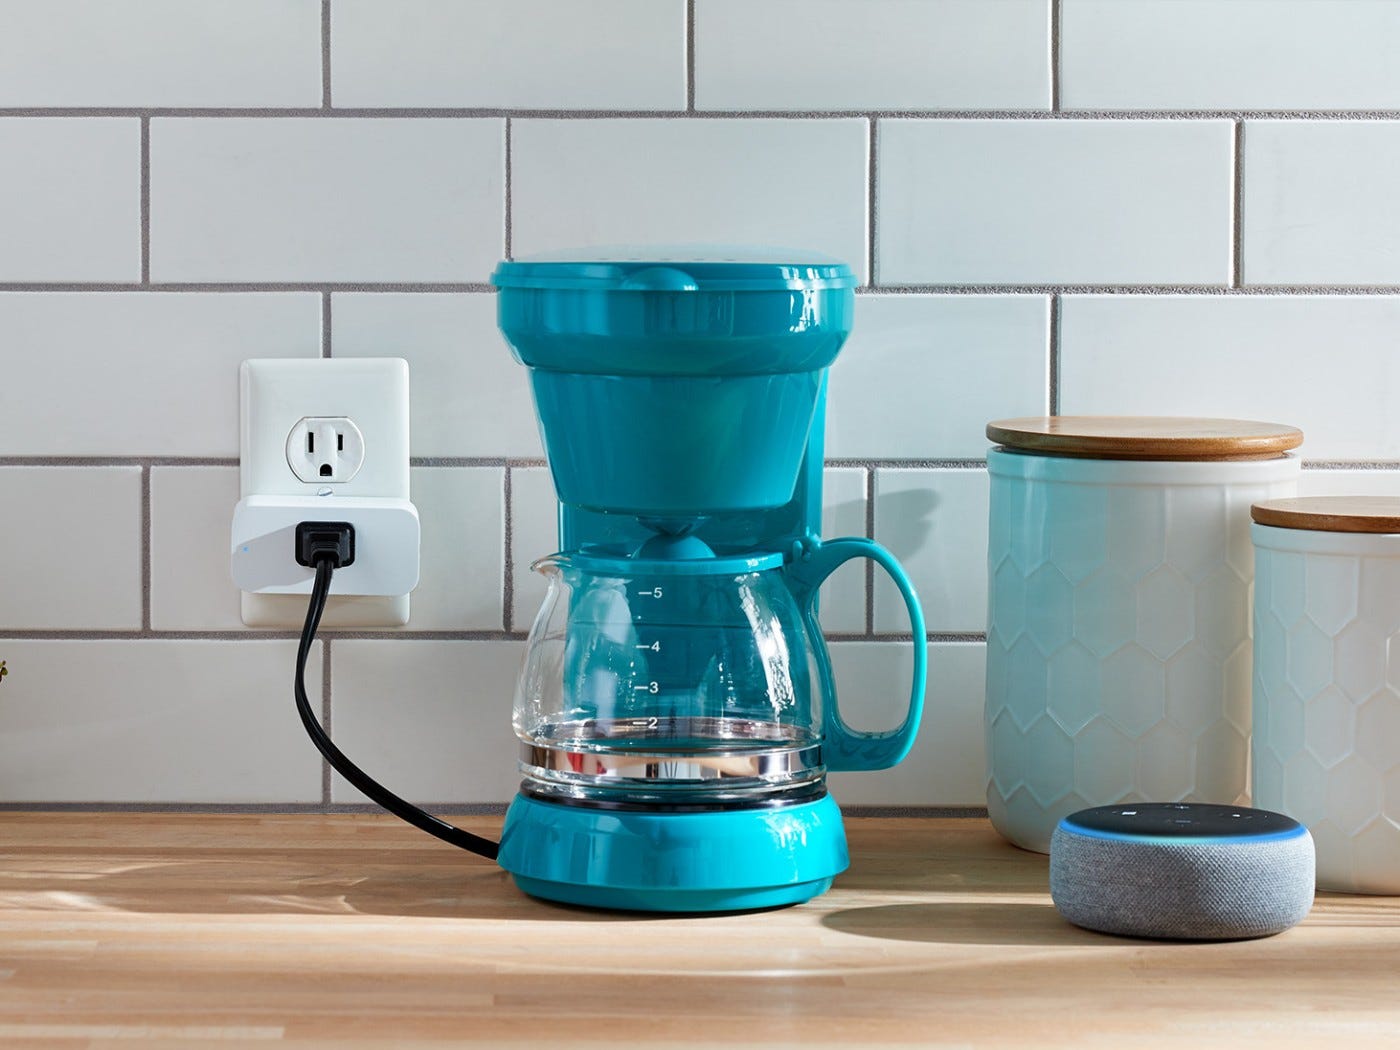 Coffee maker on a kitchen counter plugged into an outlet with Amazon smart plug.